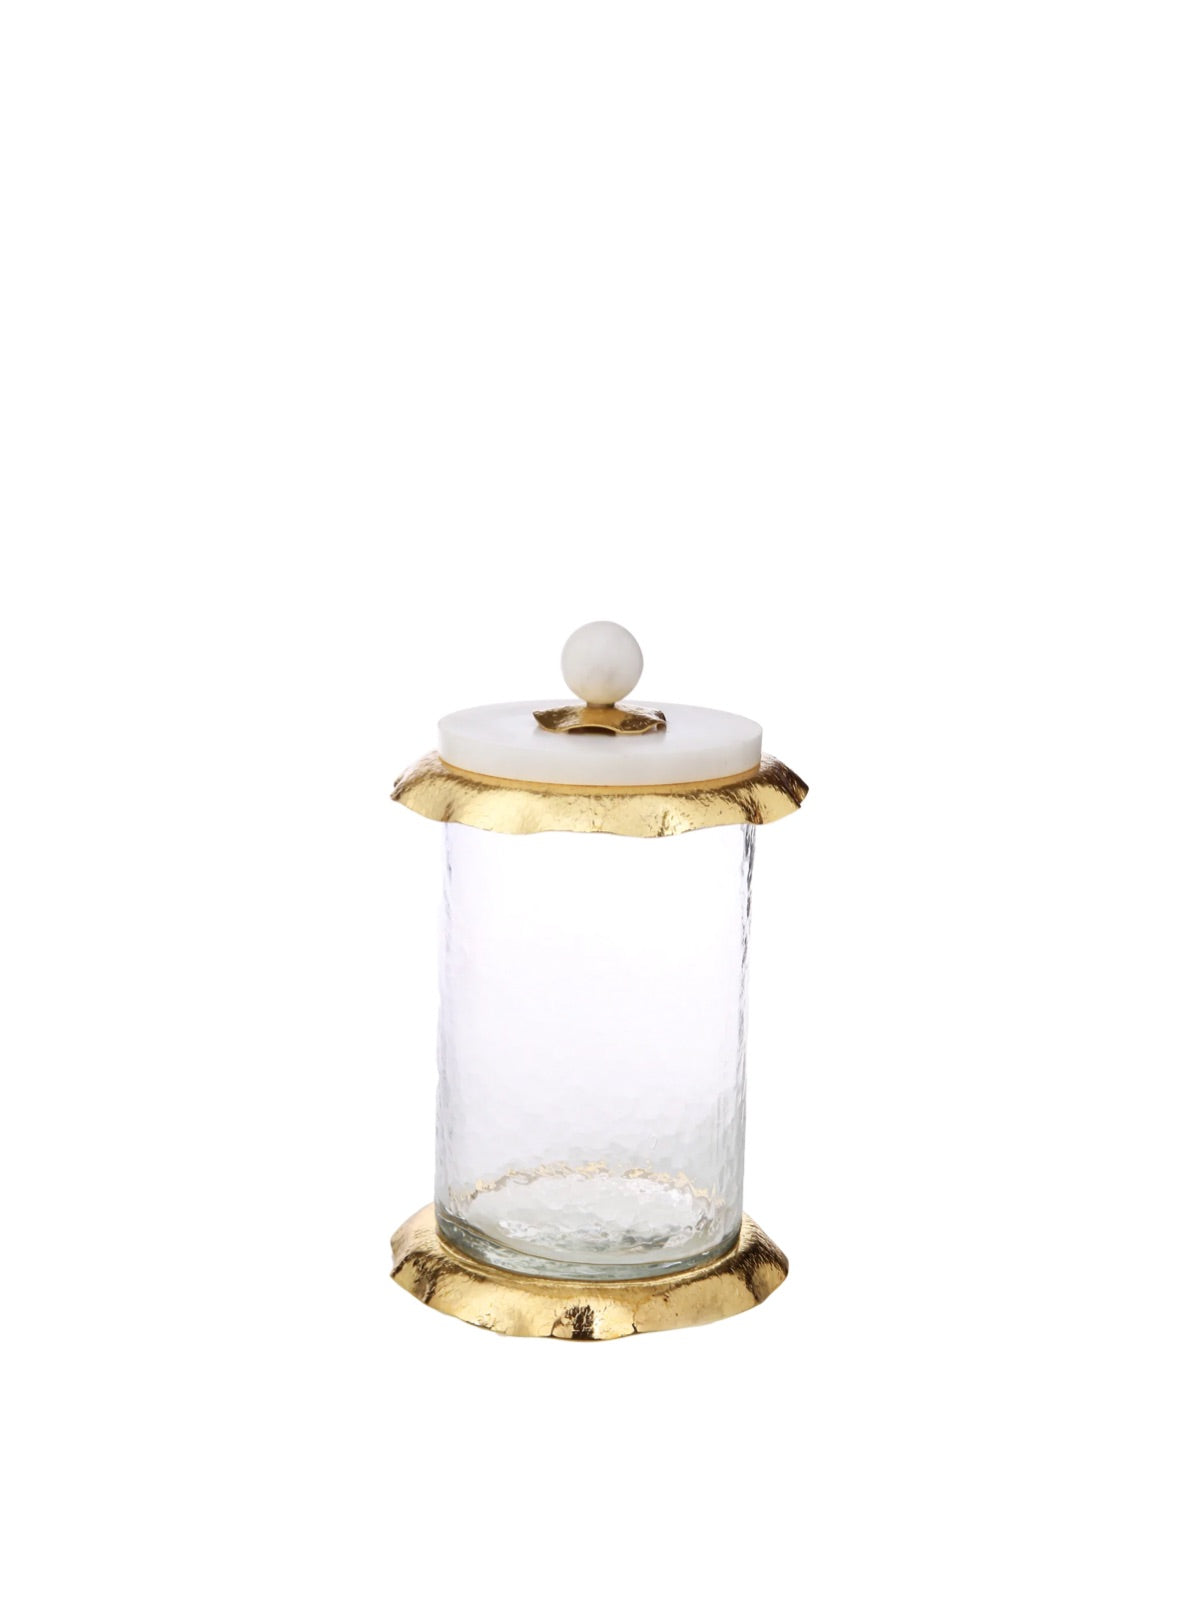 5H Luxury Kitchen Glass Canister With Gold Hammered Rim and Marble Lid - KYA Home Decor.